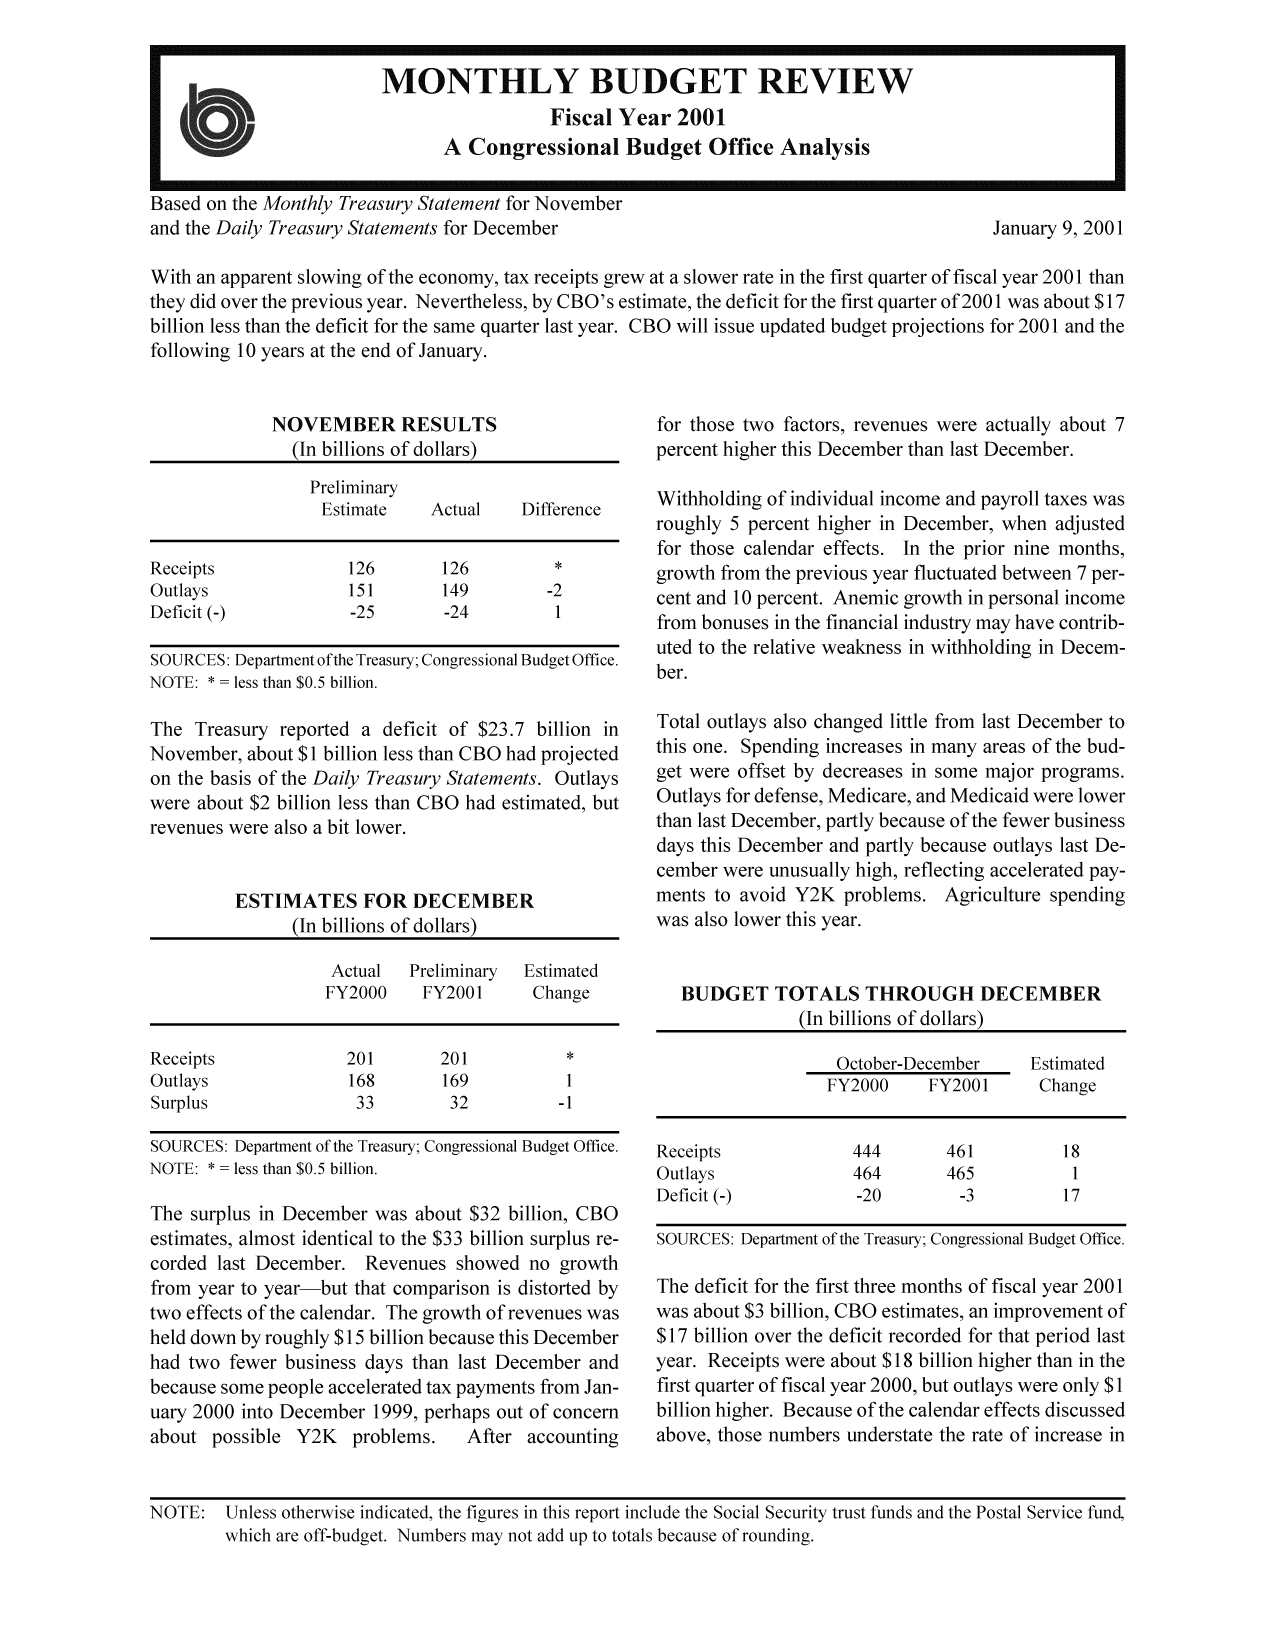 handle is hein.congrec/cbo8658 and id is 1 raw text is: I

Based on the Monthly Treasury Statement for November
and the Daily Treasury Statements for December

MONTHLY BUDGET REVIEW
Fiscal Year 2001
A Congressional Budget Office Analysis

January 9, 2001

With an apparent slowing of the economy, tax receipts grew at a slower rate in the first quarter of fiscal year 2001 than
they did over the previous year. Nevertheless, by CBO's estimate, the deficit for the first quarter of 2001 was about $17
billion less than the deficit for the same quarter last year. CBO will issue updated budget projections for 2001 and the
following 10 years at the end of January.

NOVEMBER RESULTS
(In billions of dollars)
Preliminary
Estimate    Actual   Difference
Receipts             126       126*
Outlays              151       149        -2
Deficit (-)          -25       -24         1
SOURCES: Department ofthe Treasury; Congressional Budget Office.
NOTE: *= less than $0.5 billion.
The Treasury reported a deficit of $23.7 billion in
November, about $1 billion less than CBO had projected
on the basis of the Daily Treasury Statements. Outlays
were about $2 billion less than CBO had estimated, but
revenues were also a bit lower.
ESTIMATES FOR DECEMBER
(In billions of dollars)
Actual  Preliminary  Estimated
FY2000    FY2001      Change
Receipts             201       201*
Outlays              168       169          1
Surplus               33        32         -1
SOURCES: Department of the Treasury; Congressional Budget Office.
NOTE: *= less than $0.5 billion.
The surplus in December was about $32 billion, CBO
estimates, almost identical to the $33 billion surplus re-
corded last December. Revenues showed no growth
from year to year-but that comparison is distorted by
two effects of the calendar. The growth of revenues was
held down by roughly $15 billion because this December
had two fewer business days than last December and
because some people accelerated tax payments from Jan-
uary 2000 into December 1999, perhaps out of concern
about possible Y2K    problems.   After accounting

for those two factors, revenues were actually about 7
percent higher this December than last December.
Withholding of individual income and payroll taxes was
roughly 5 percent higher in December, when adjusted
for those calendar effects. In the prior nine months,
growth from the previous year fluctuated between 7 per-
cent and 10 percent. Anemic growth in personal income
from bonuses in the financial industry may have contrib-
uted to the relative weakness in withholding in Decem-
ber.
Total outlays also changed little from last December to
this one. Spending increases in many areas of the bud-
get were offset by decreases in some major programs.
Outlays for defense, Medicare, and Medicaid were lower
than last December, partly because of the fewer business
days this December and partly because outlays last De-
cember were unusually high, reflecting accelerated pay-
ments to avoid Y2K problems. Agriculture spending
was also lower this year.
BUDGET TOTALS THROUGH DECEMBER
(In billions of dollars)
October-December    Estimated
FY2000     FY2001     Change
Receipts             444       461         18
Outlays              464       465          1
Deficit (-)          -20        -3         17
SOURCES: Department of the Treasury; Congressional Budget Office.
The deficit for the first three months of fiscal year 2001
was about $3 billion, CBO estimates, an improvement of
$17 billion over the deficit recorded for that period last
year. Receipts were about $18 billion higher than in the
first quarter of fiscal year 2000, but outlays were only $1
billion higher. Because of the calendar effects discussed
above, those numbers understate the rate of increase in

NOTE: Unless otherwise indicated, the figures in this report include the Social Security trust funds and the Postal Service fund,
wvhich are off-budget. Numbers may not add up to totals because of rounding.

I


